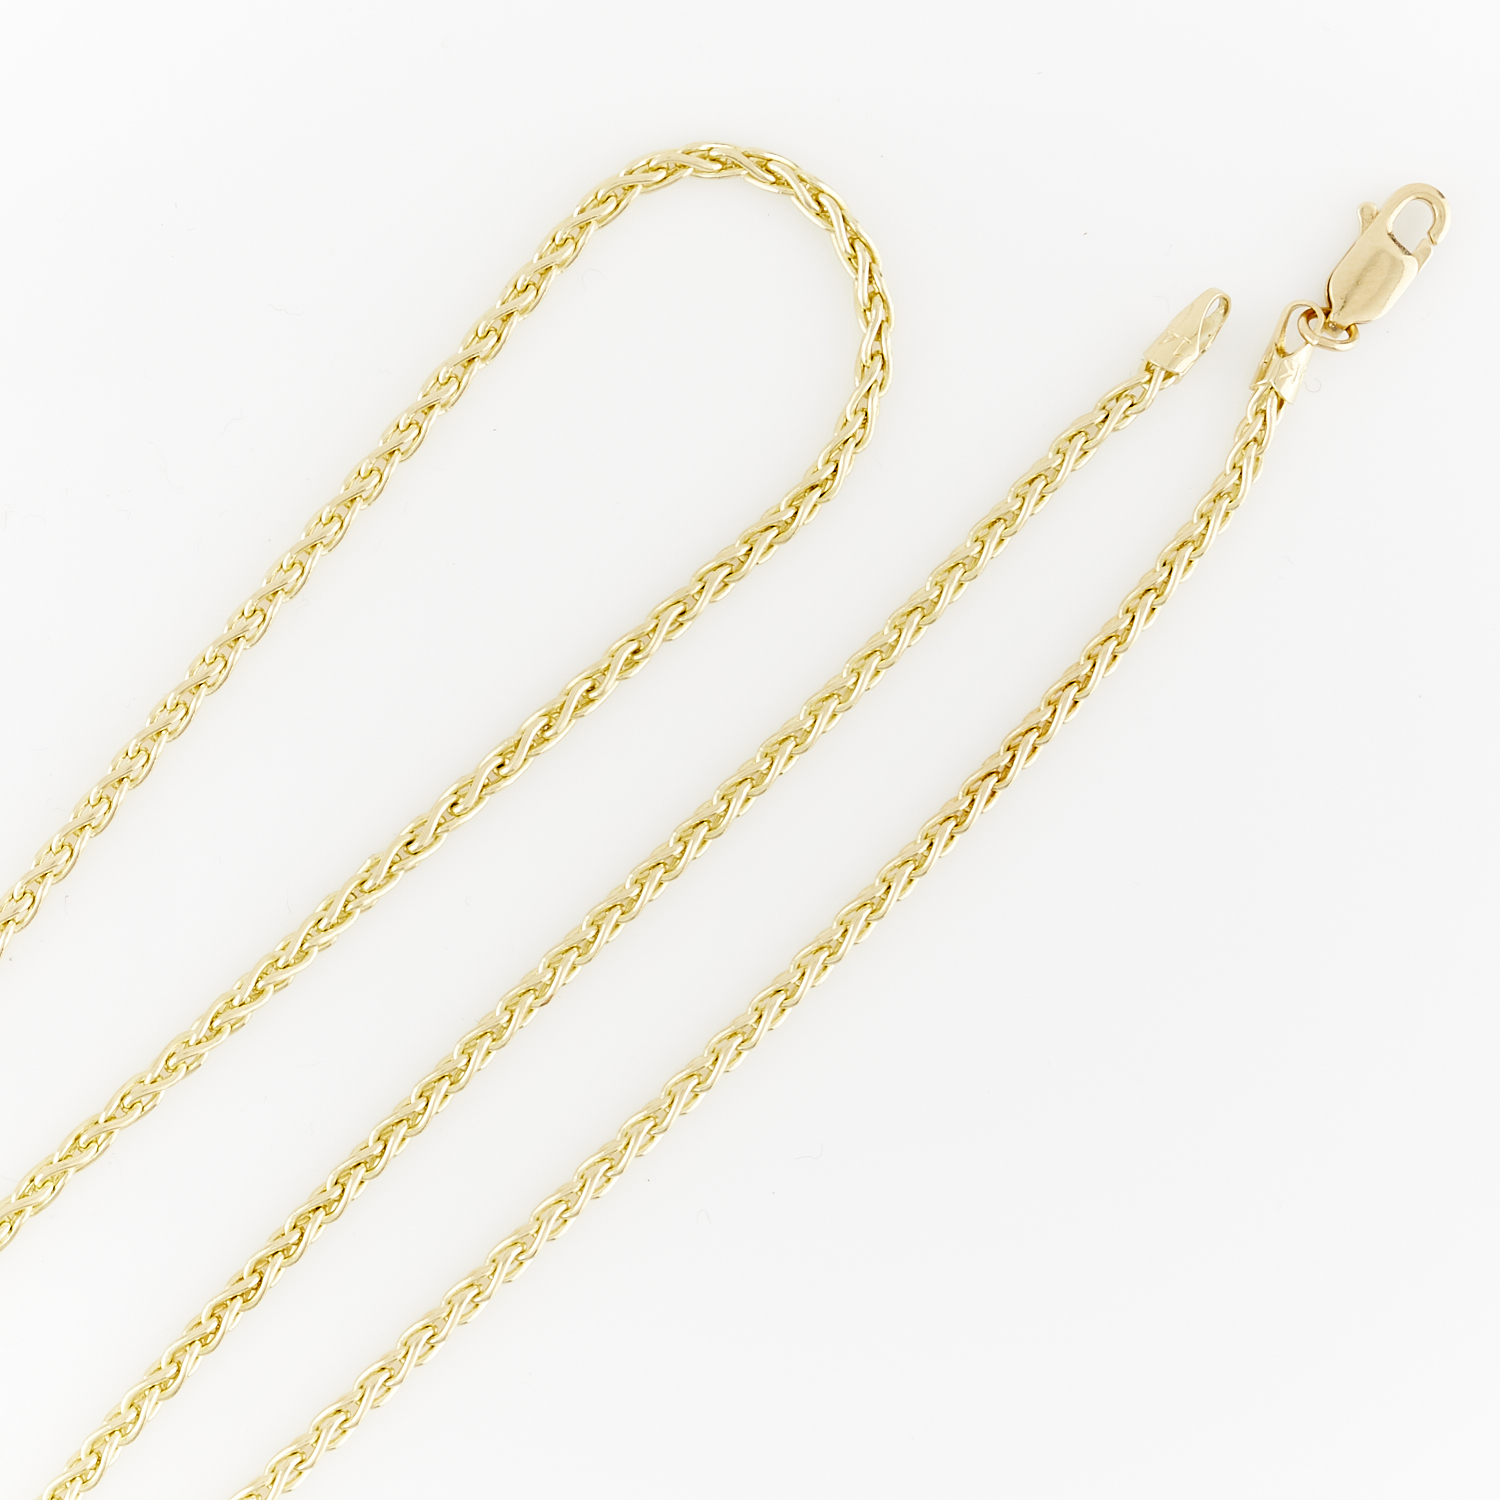 14k Yellow Gold Rolled Wheat Chain - Image 3 of 8